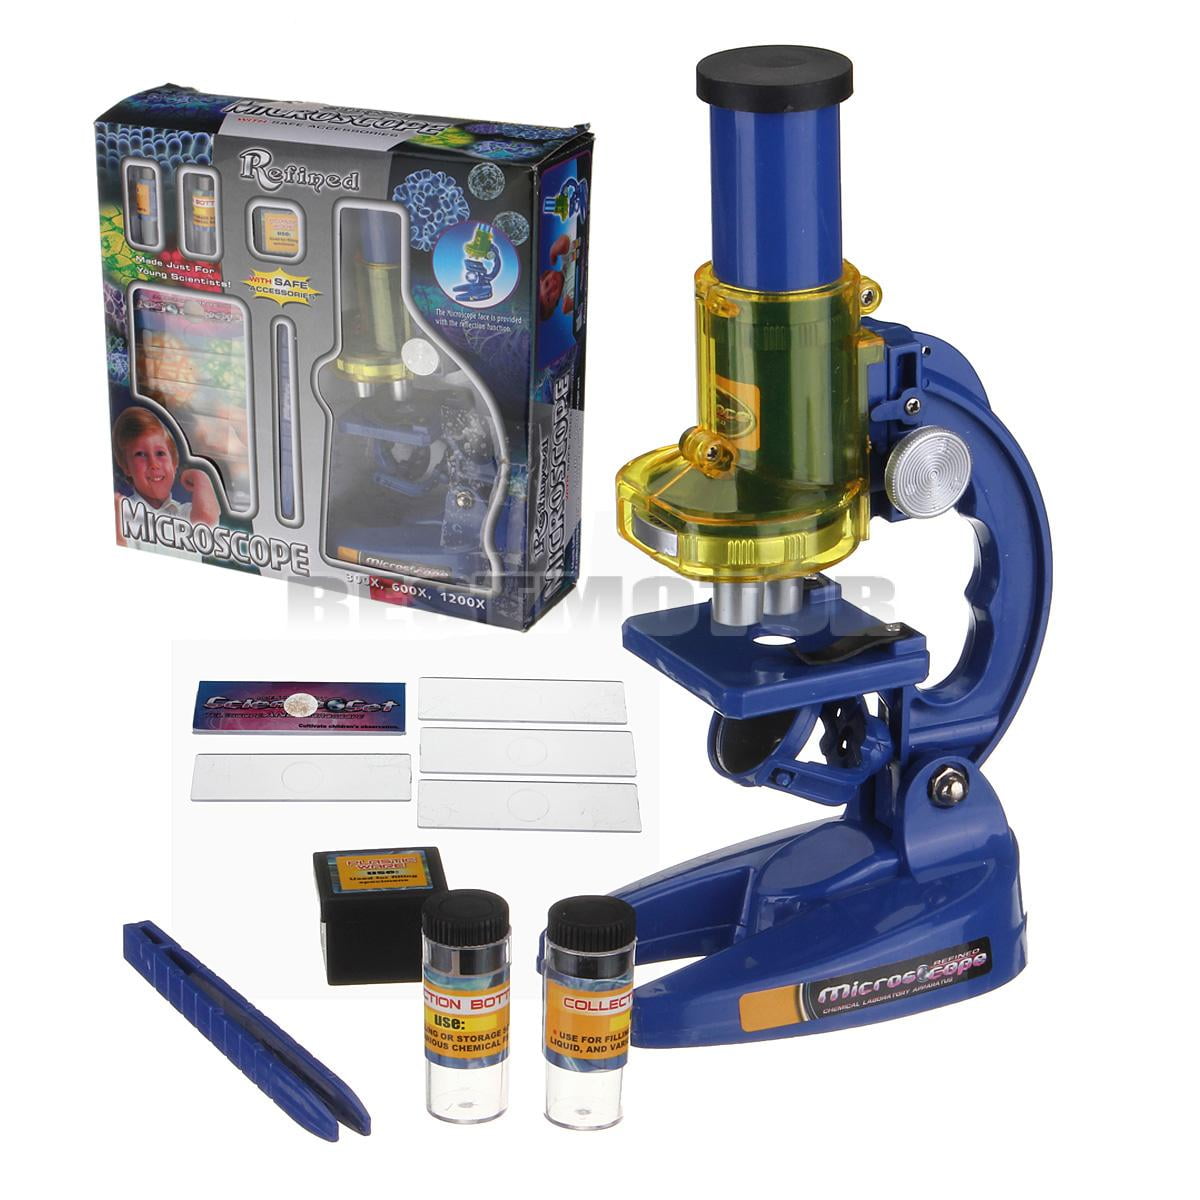 lifcasual 1200 Times Upgraded Childrens Microscope Toys Science Biology Experiment Set Toys Primary School Students Microscope Toys Microscope Teaching Tools Set for School Kids Blue